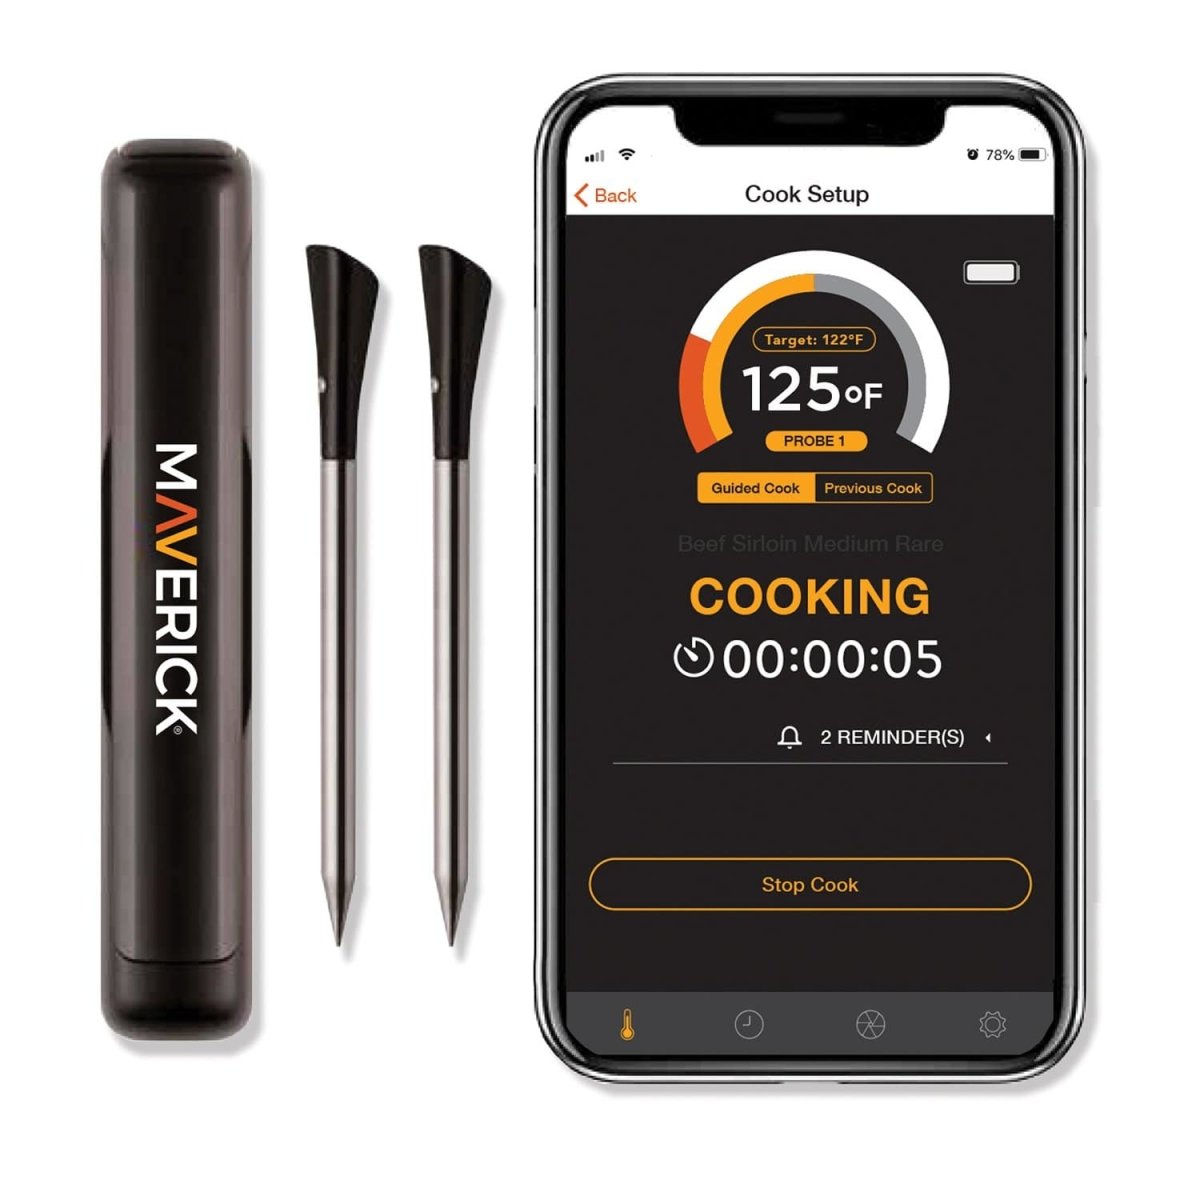 BT-32 Bluetooth Stake Truly Wireless Intelligent Food Thermometer (2 PROBES) - Texas Star Grill Shop BT-32